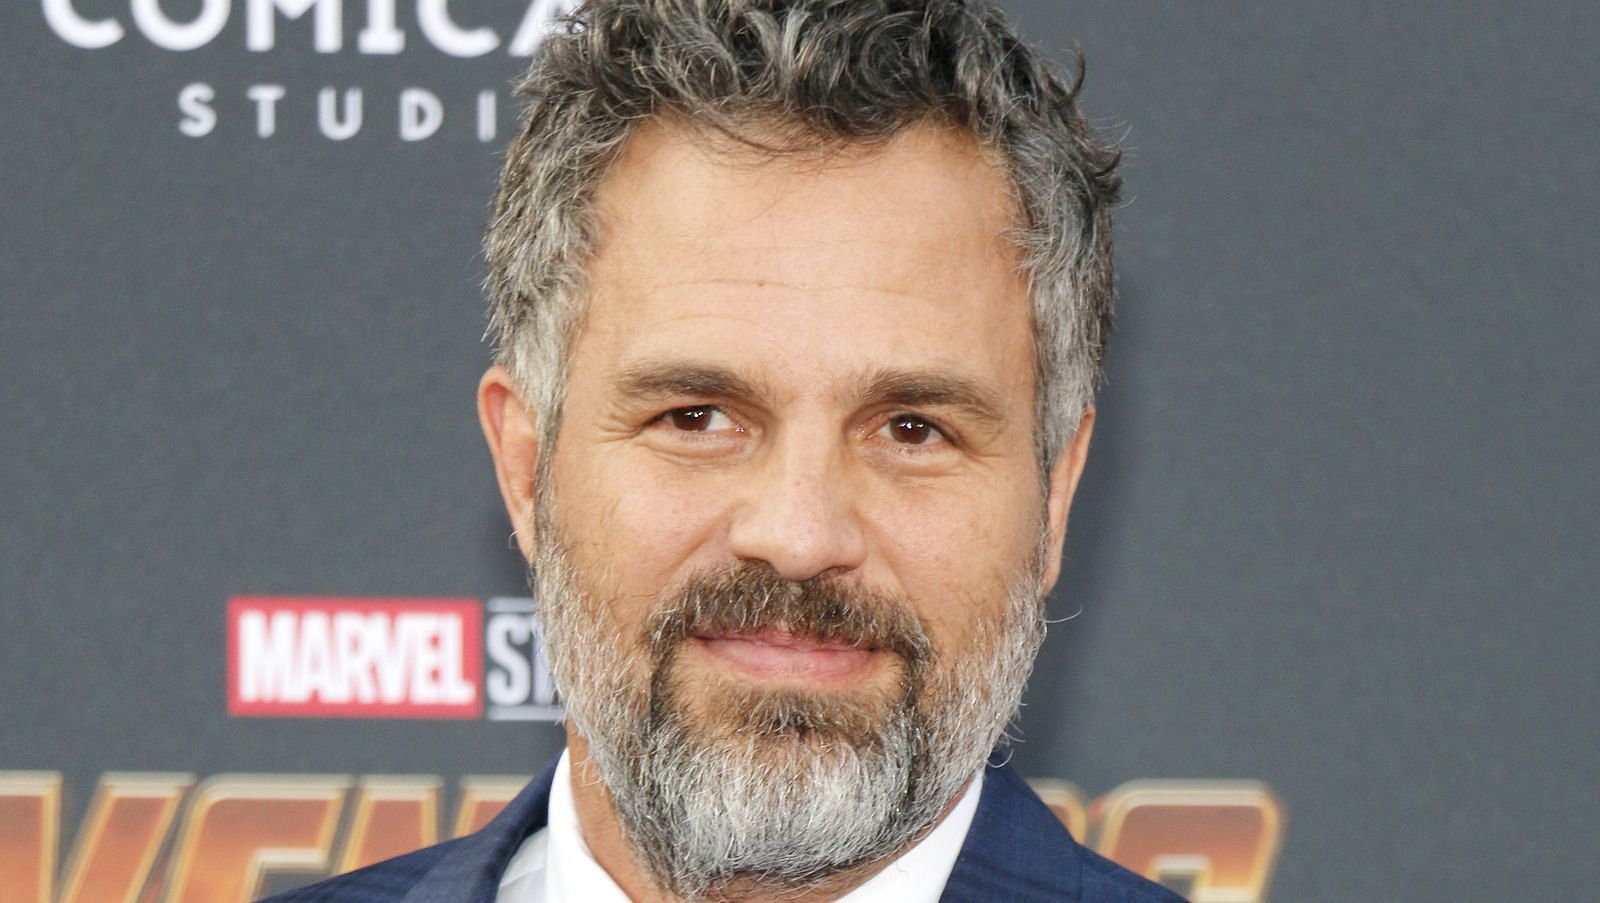 Mark Ruffalo earns $15 million for his role as the scientist with a monstrous alter-ego (Image via Getty Images)